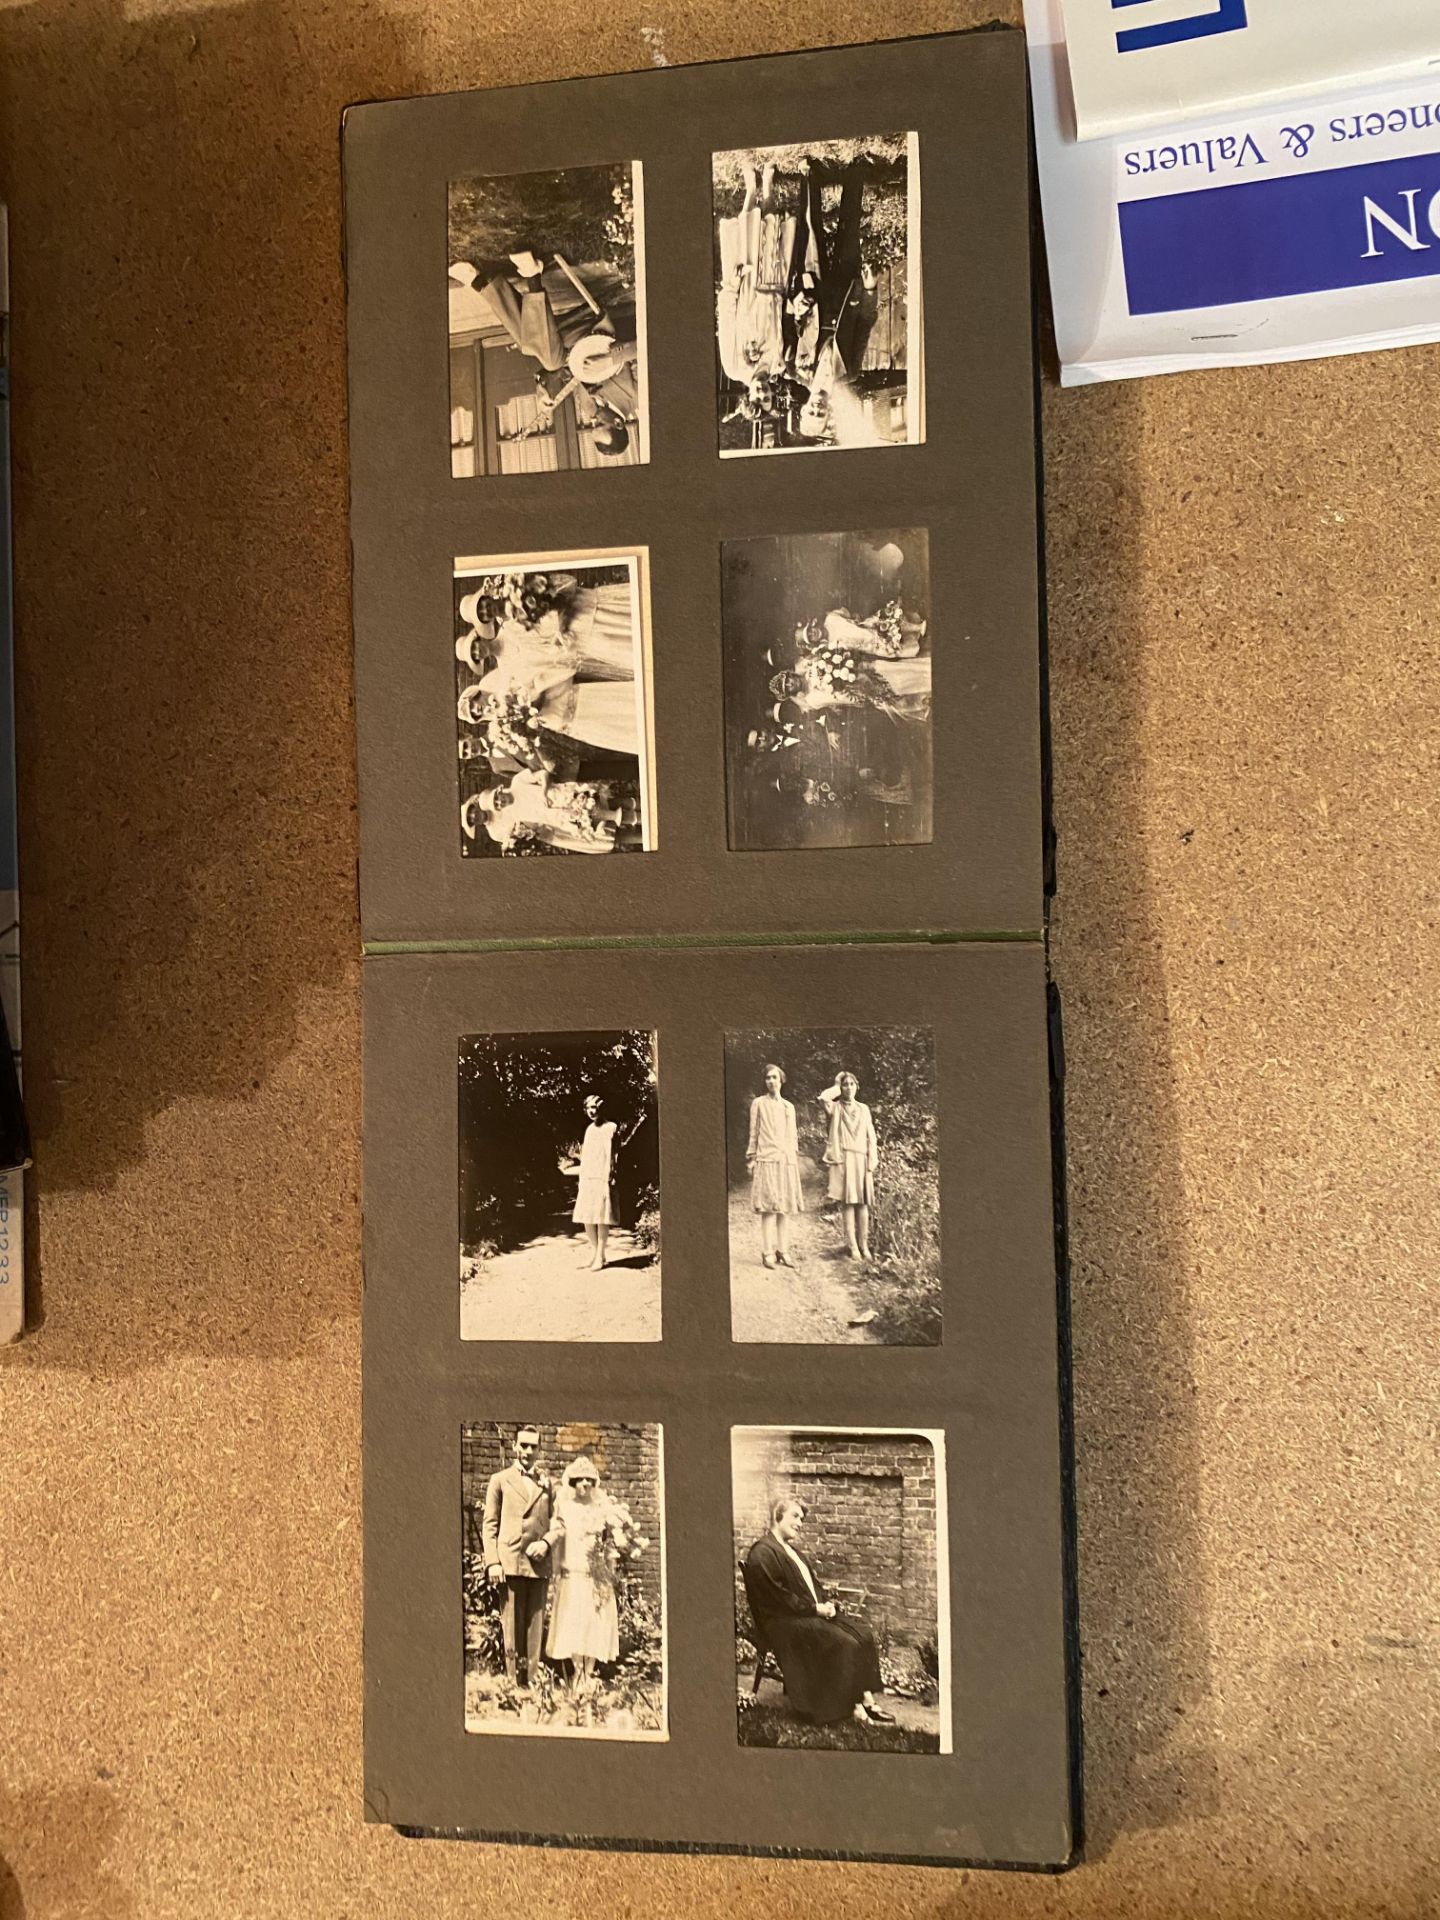 A SMALL VINTAGE PHOTO ALBUM CONTAINING BLACK AND WHITE IMAGES - Image 5 of 8